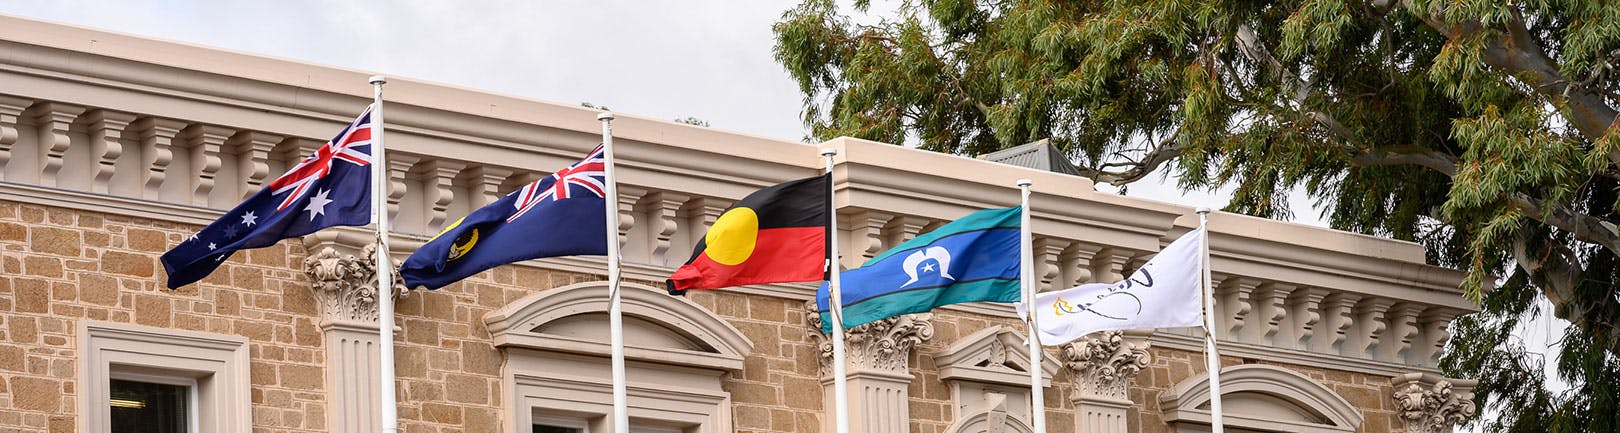 Five flags flying in front of the Unley Town Hall